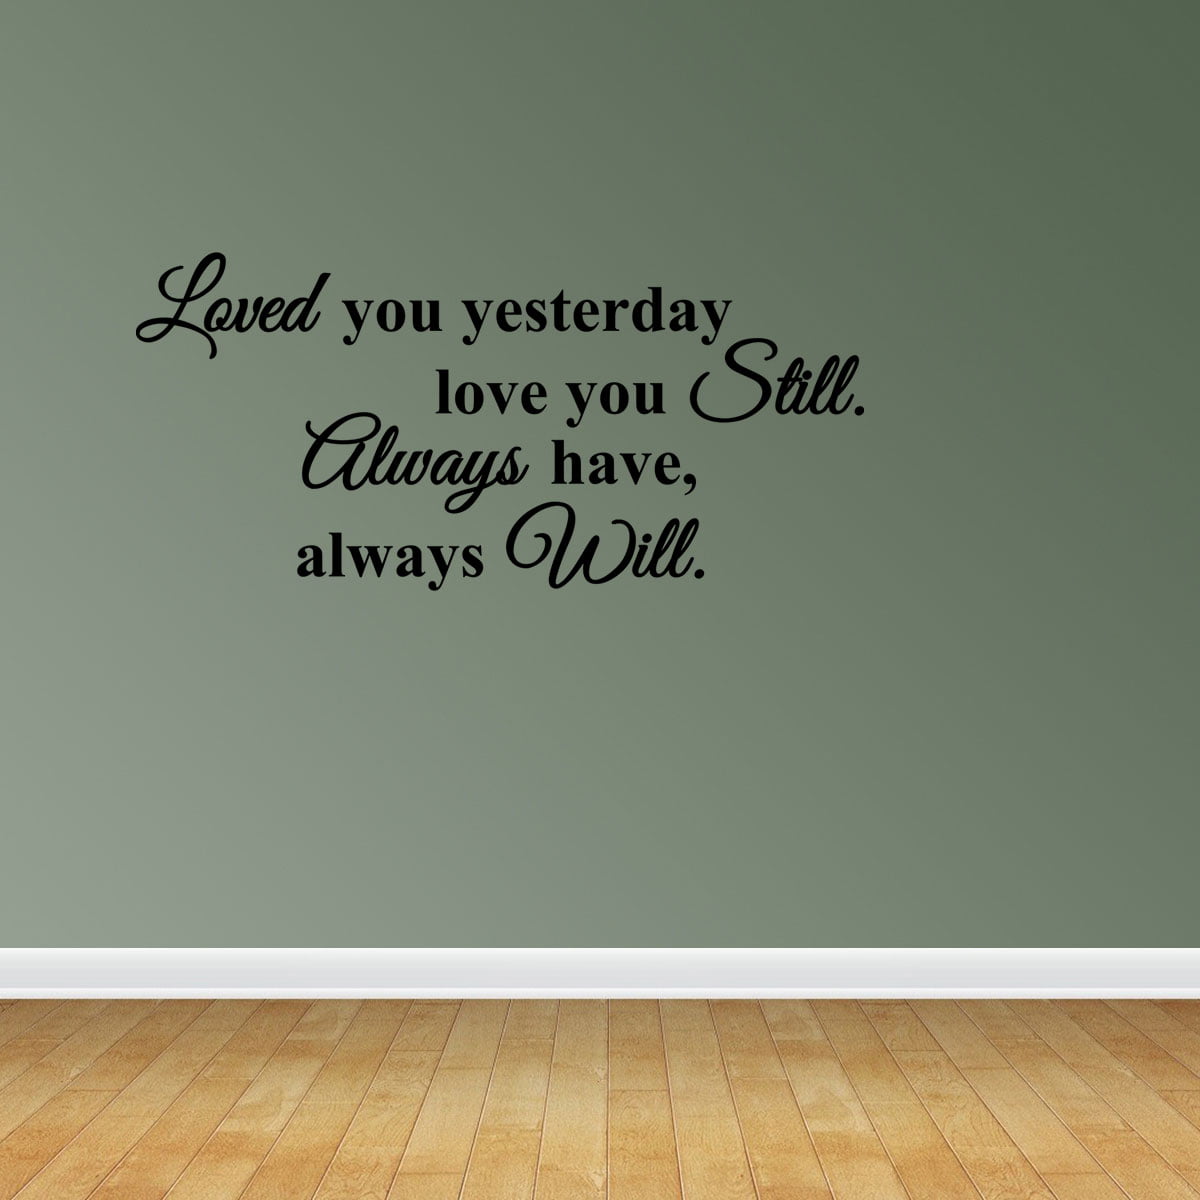 Details about   LOVED YOU YESTERDAY LOVE YOU STILL ALWAYS WALL QUOTE DECAL VINYL WORDS STICKER